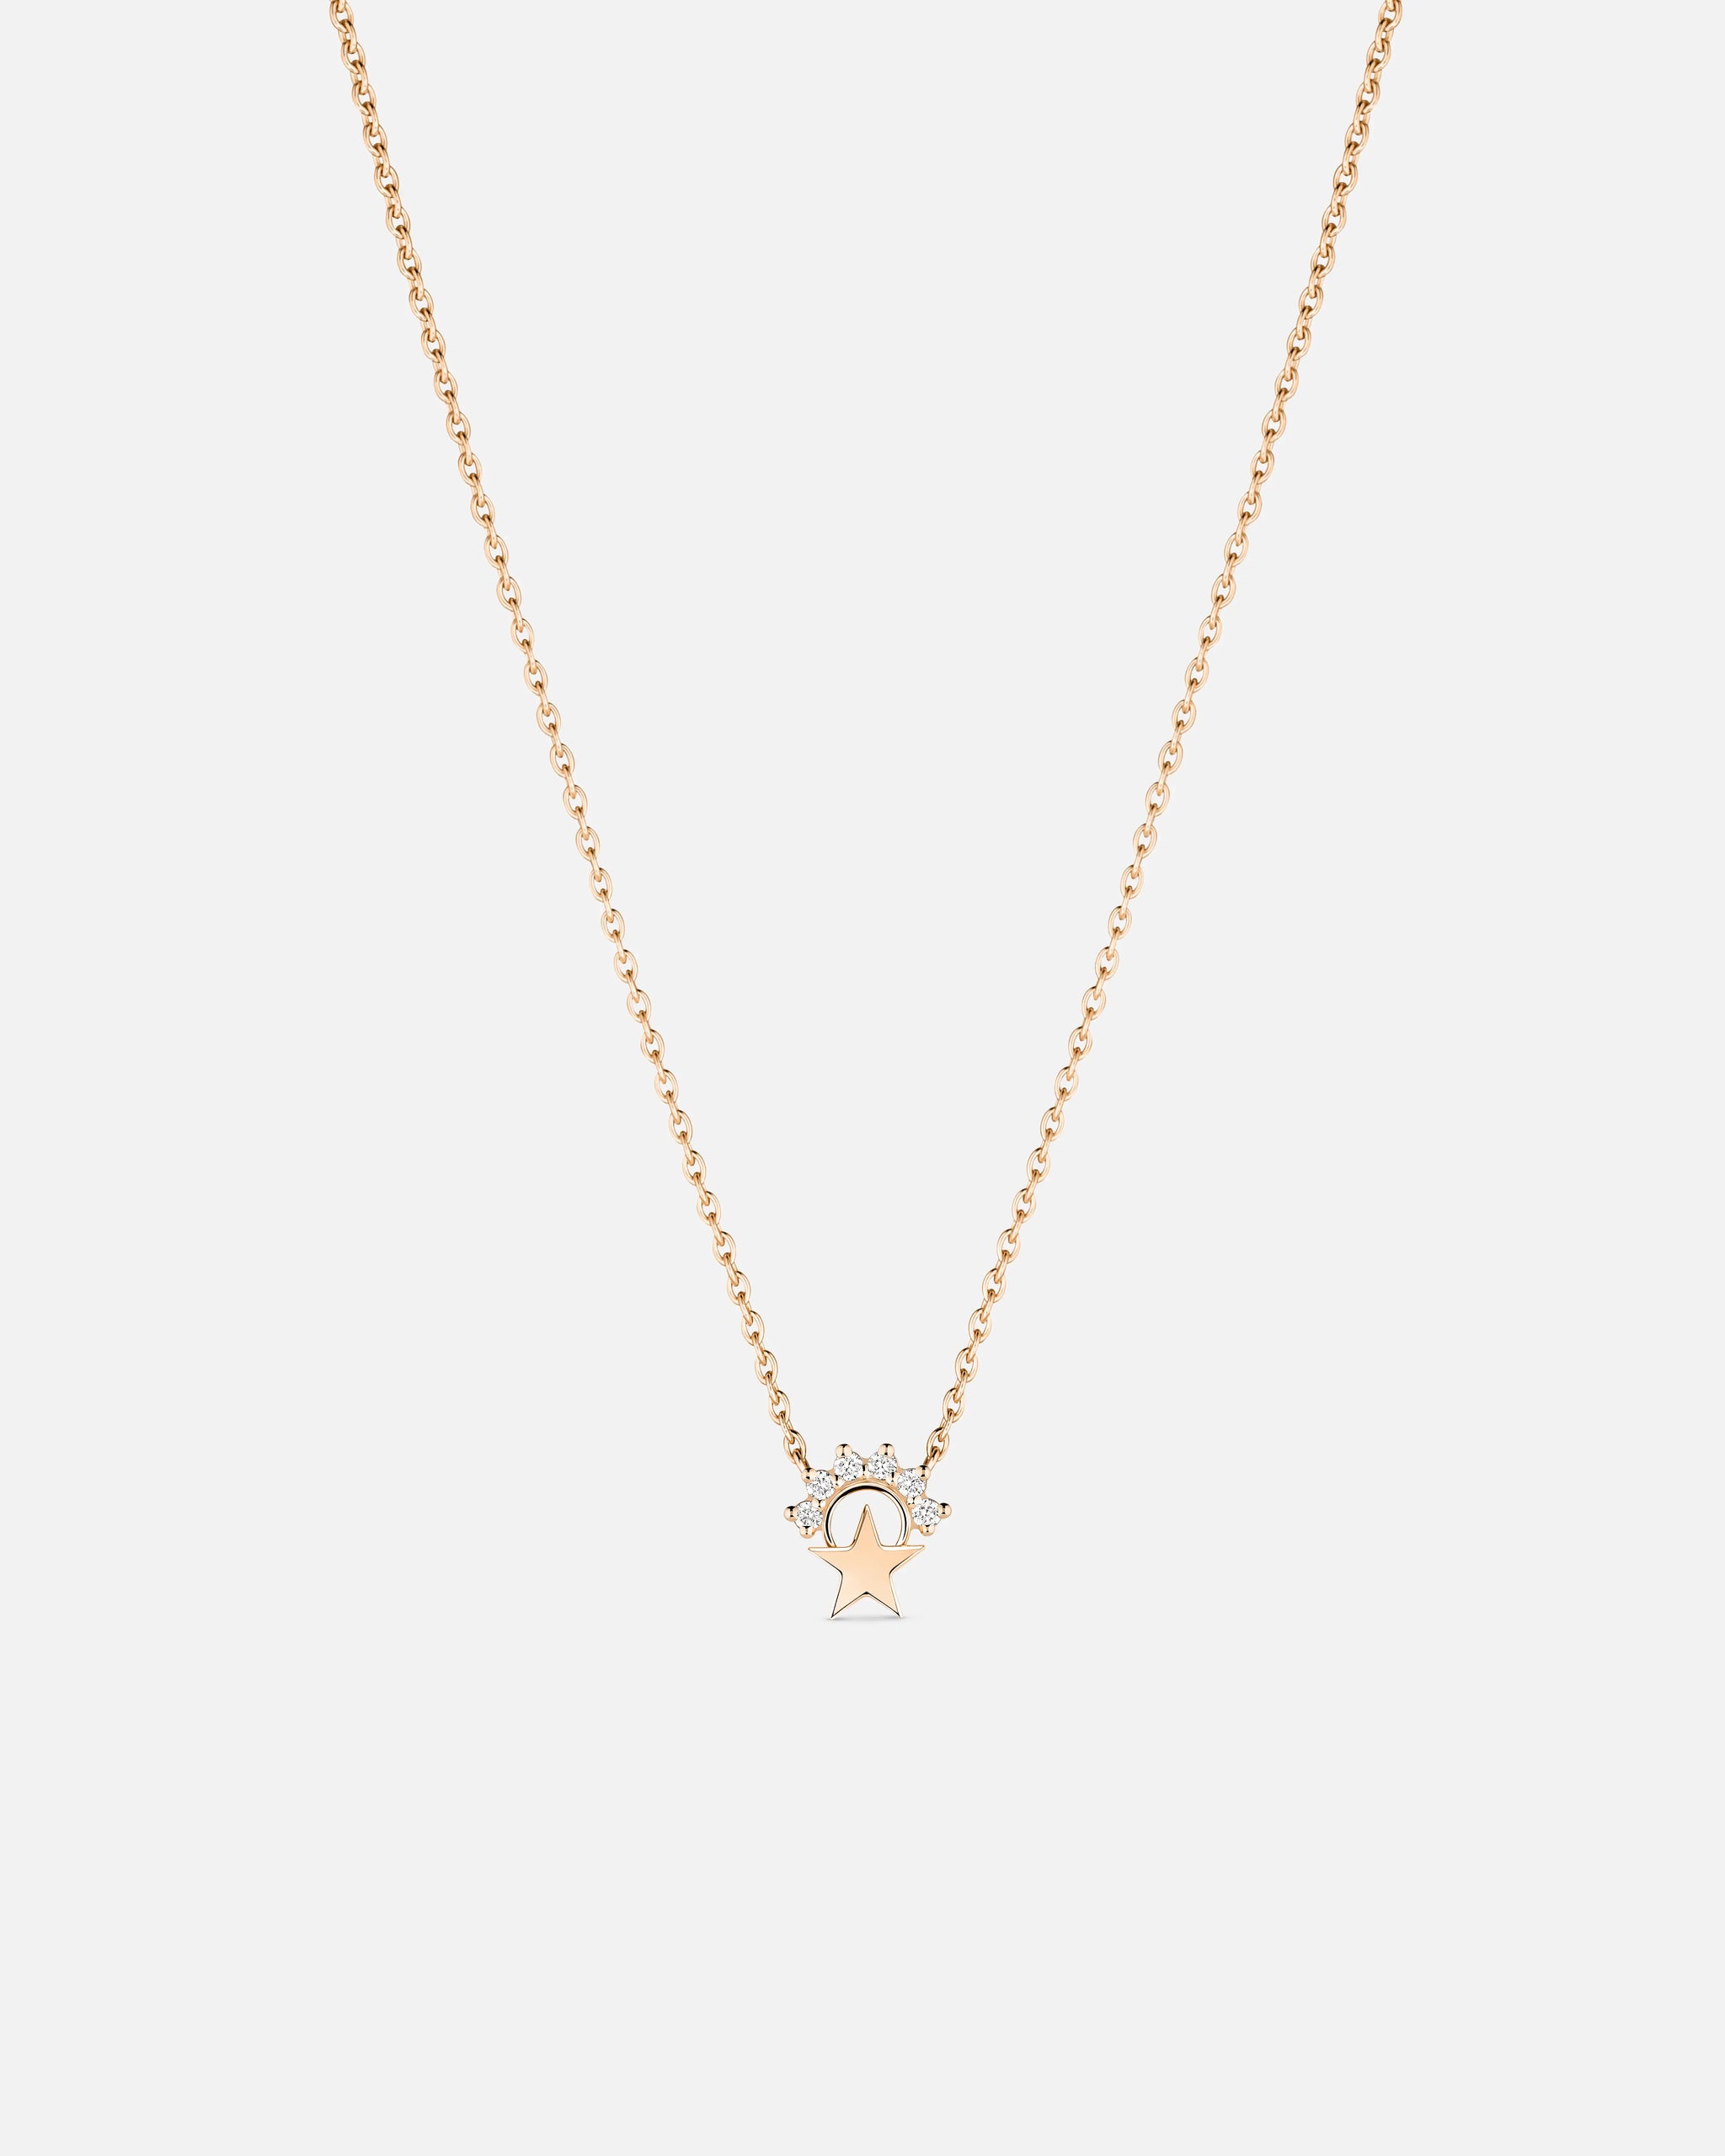 Small Star Pendant in Rose Gold - 1 - Nouvel Heritage